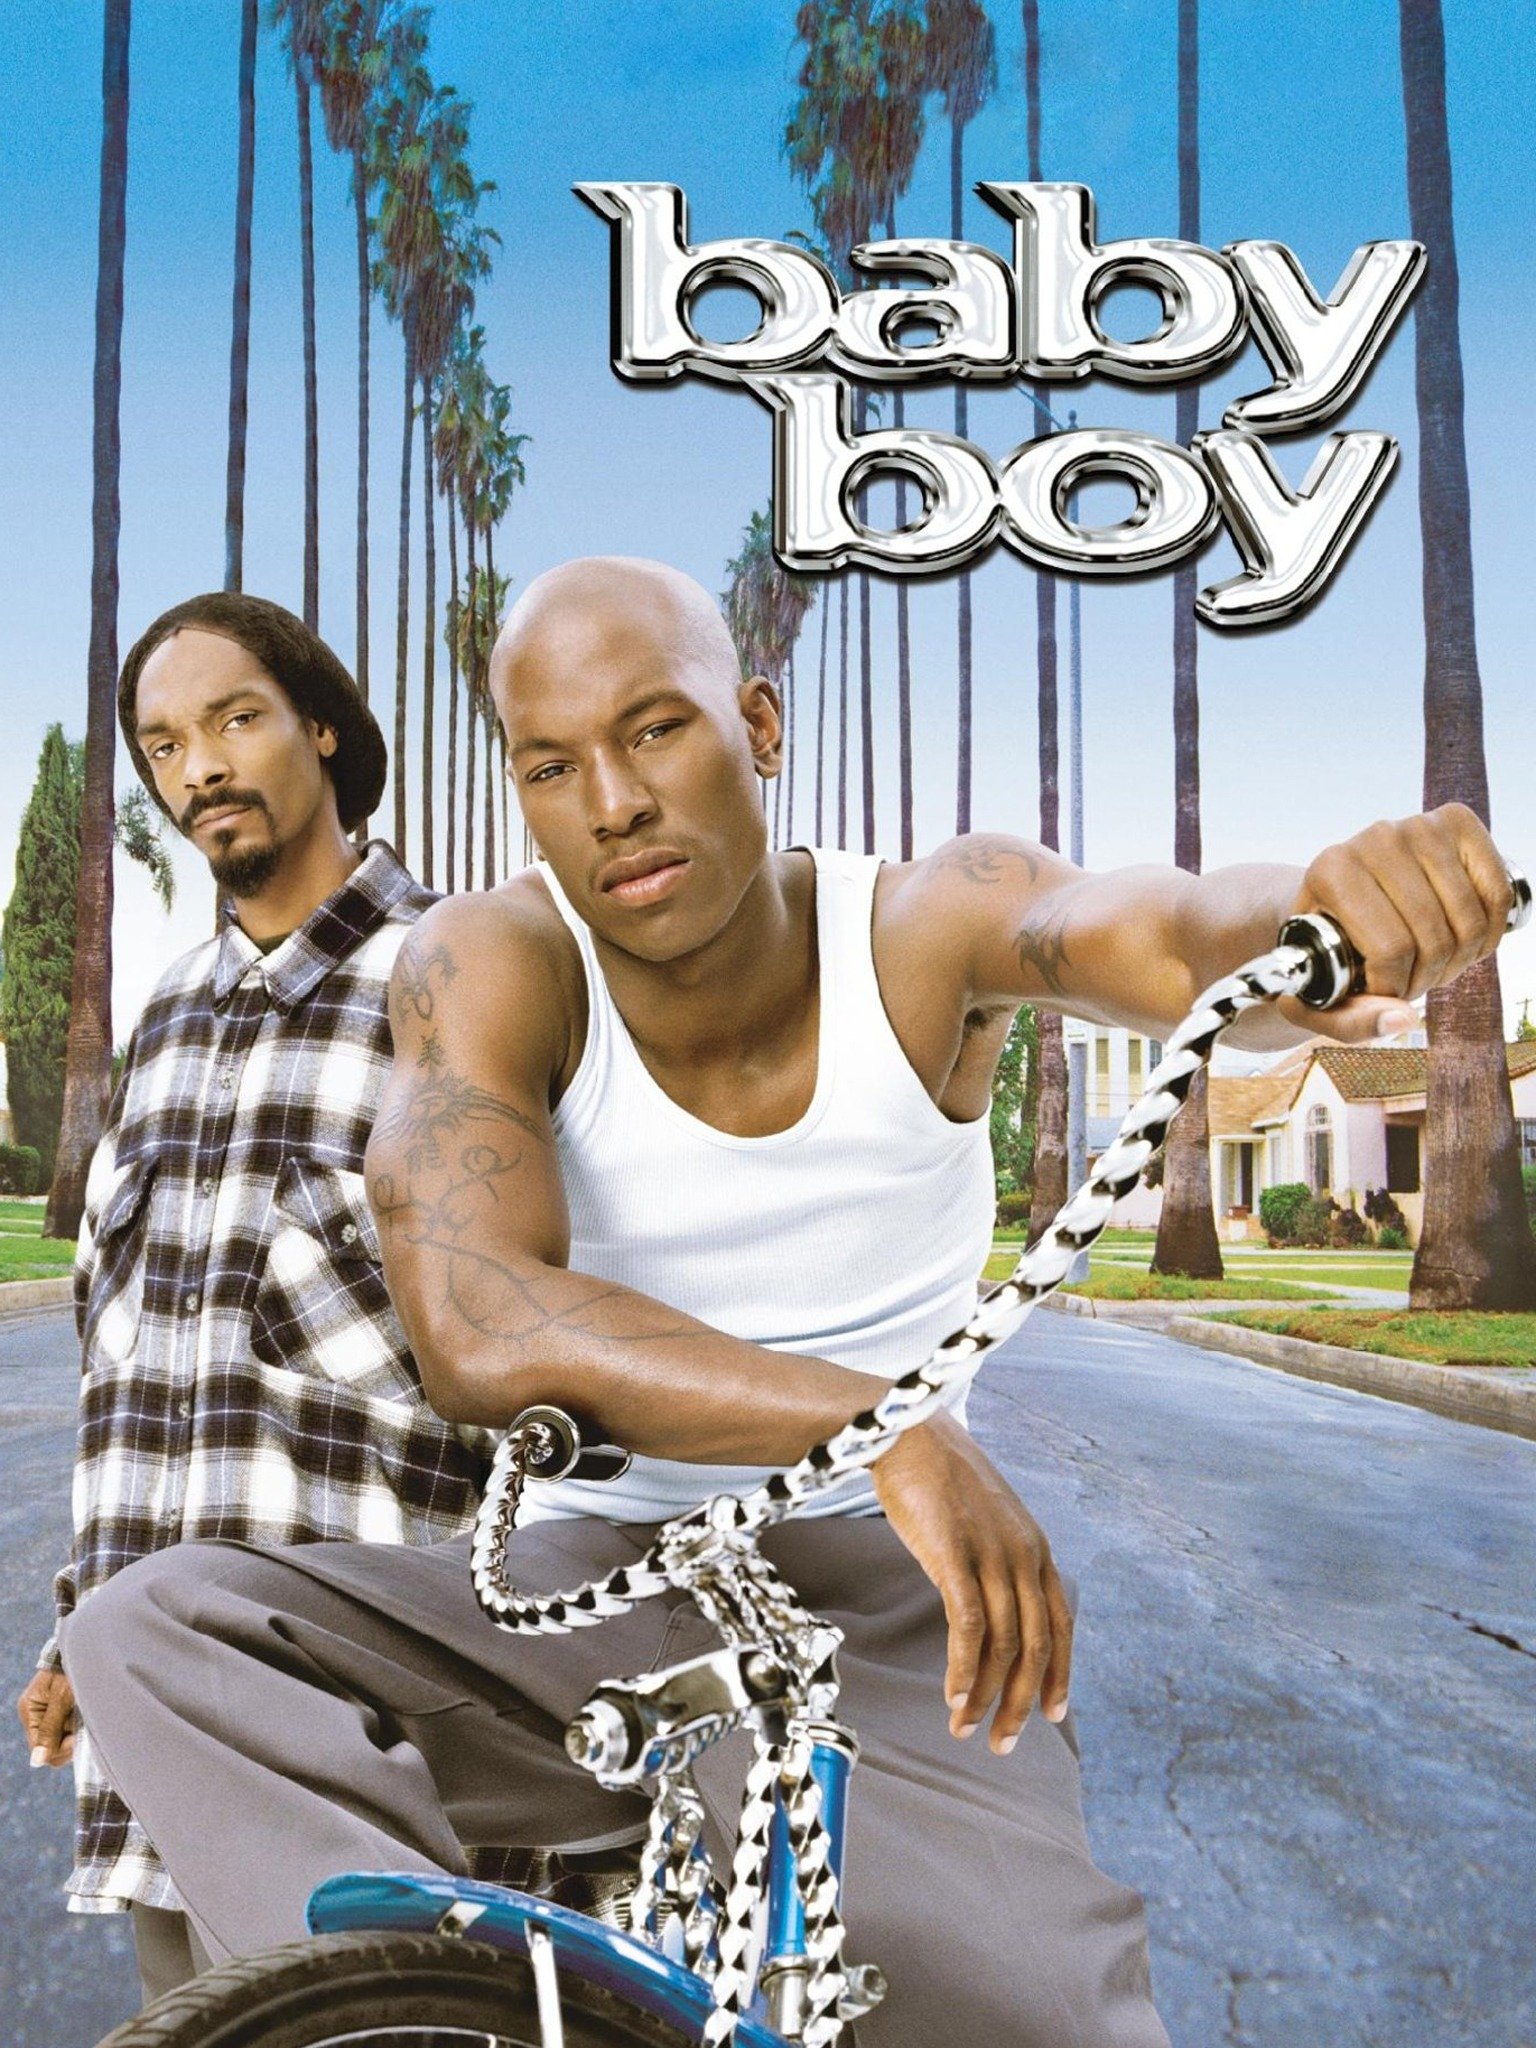 Baby Boy - Rotten Tomatoes